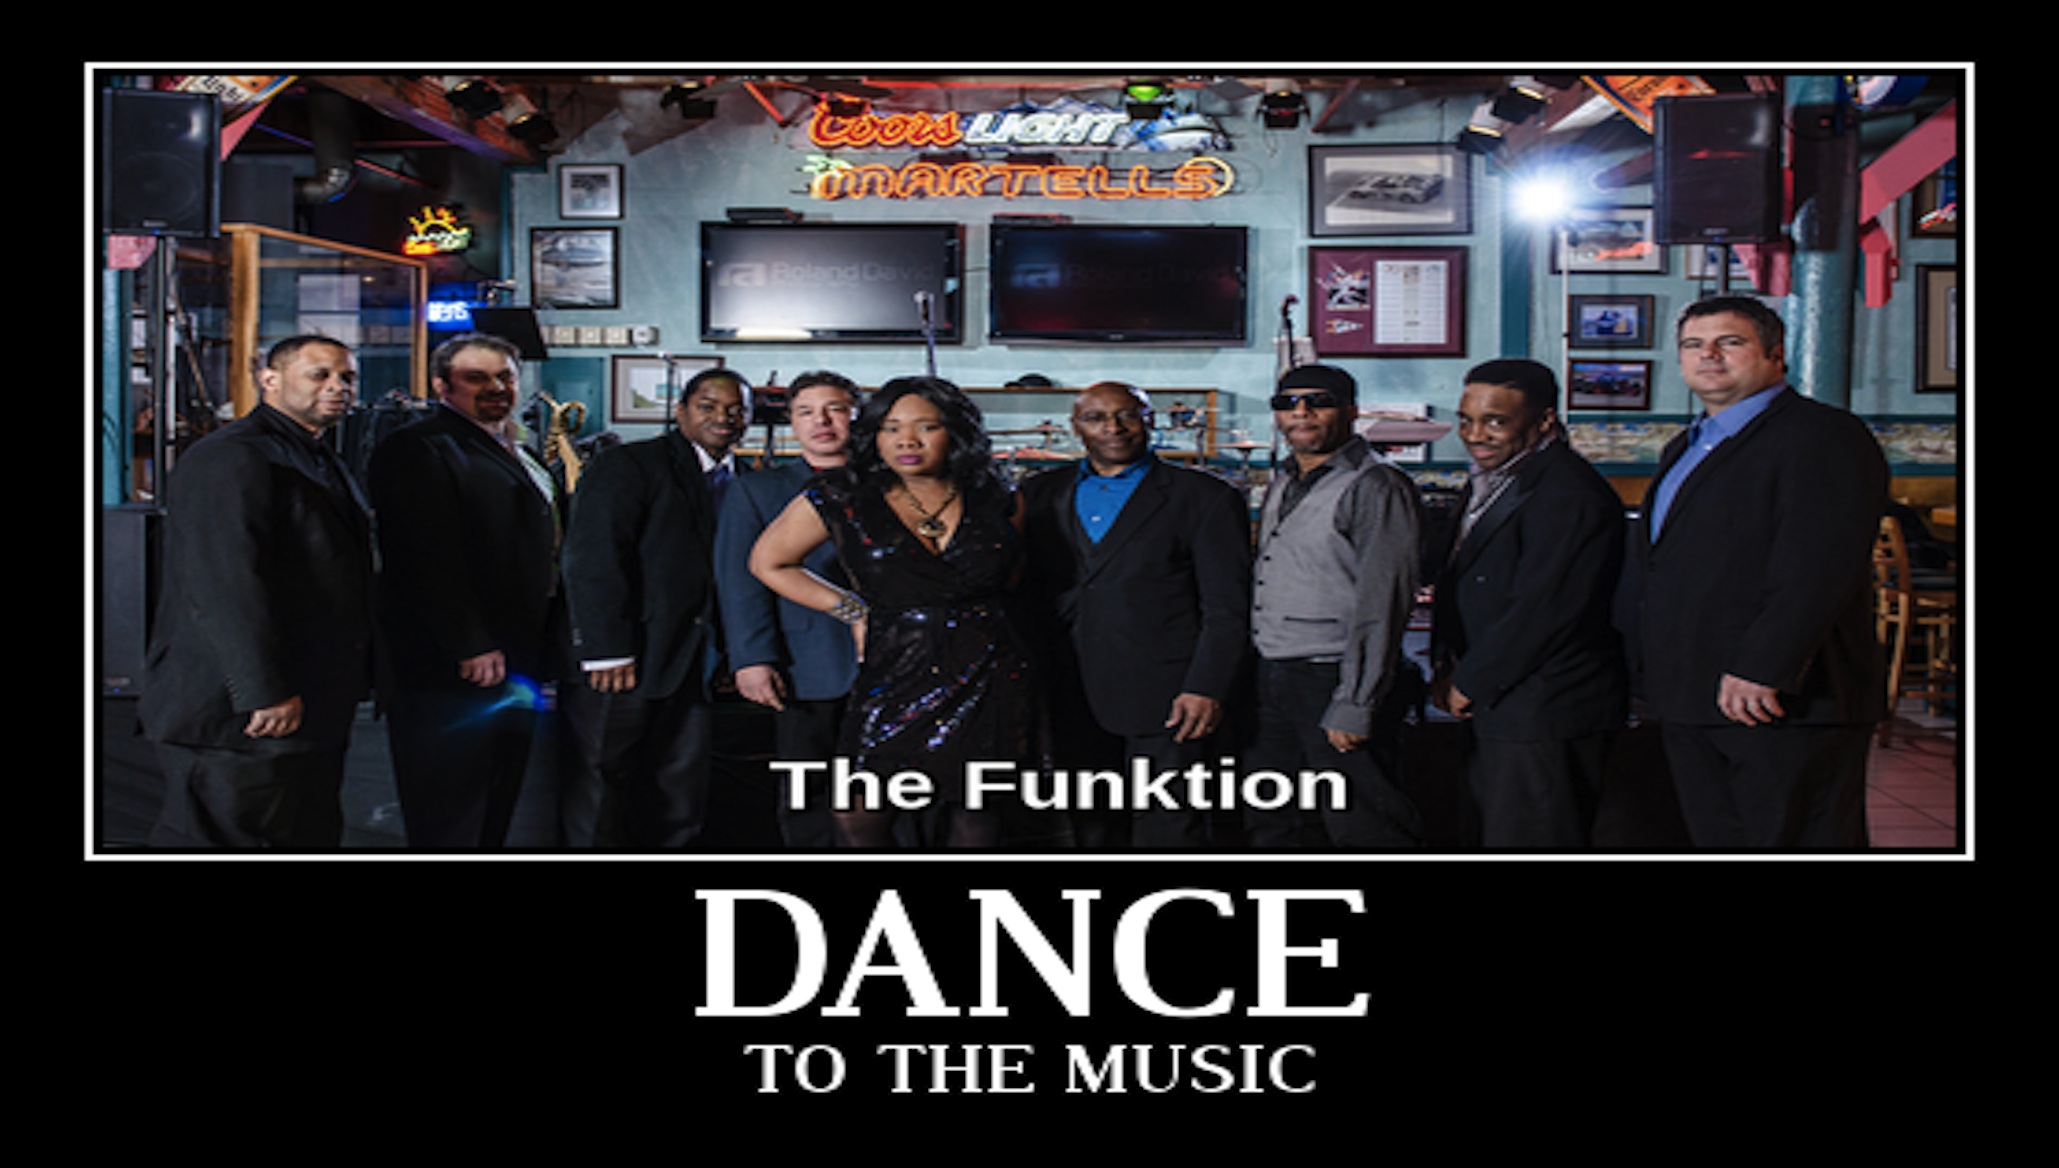 The Funktion Dance Band